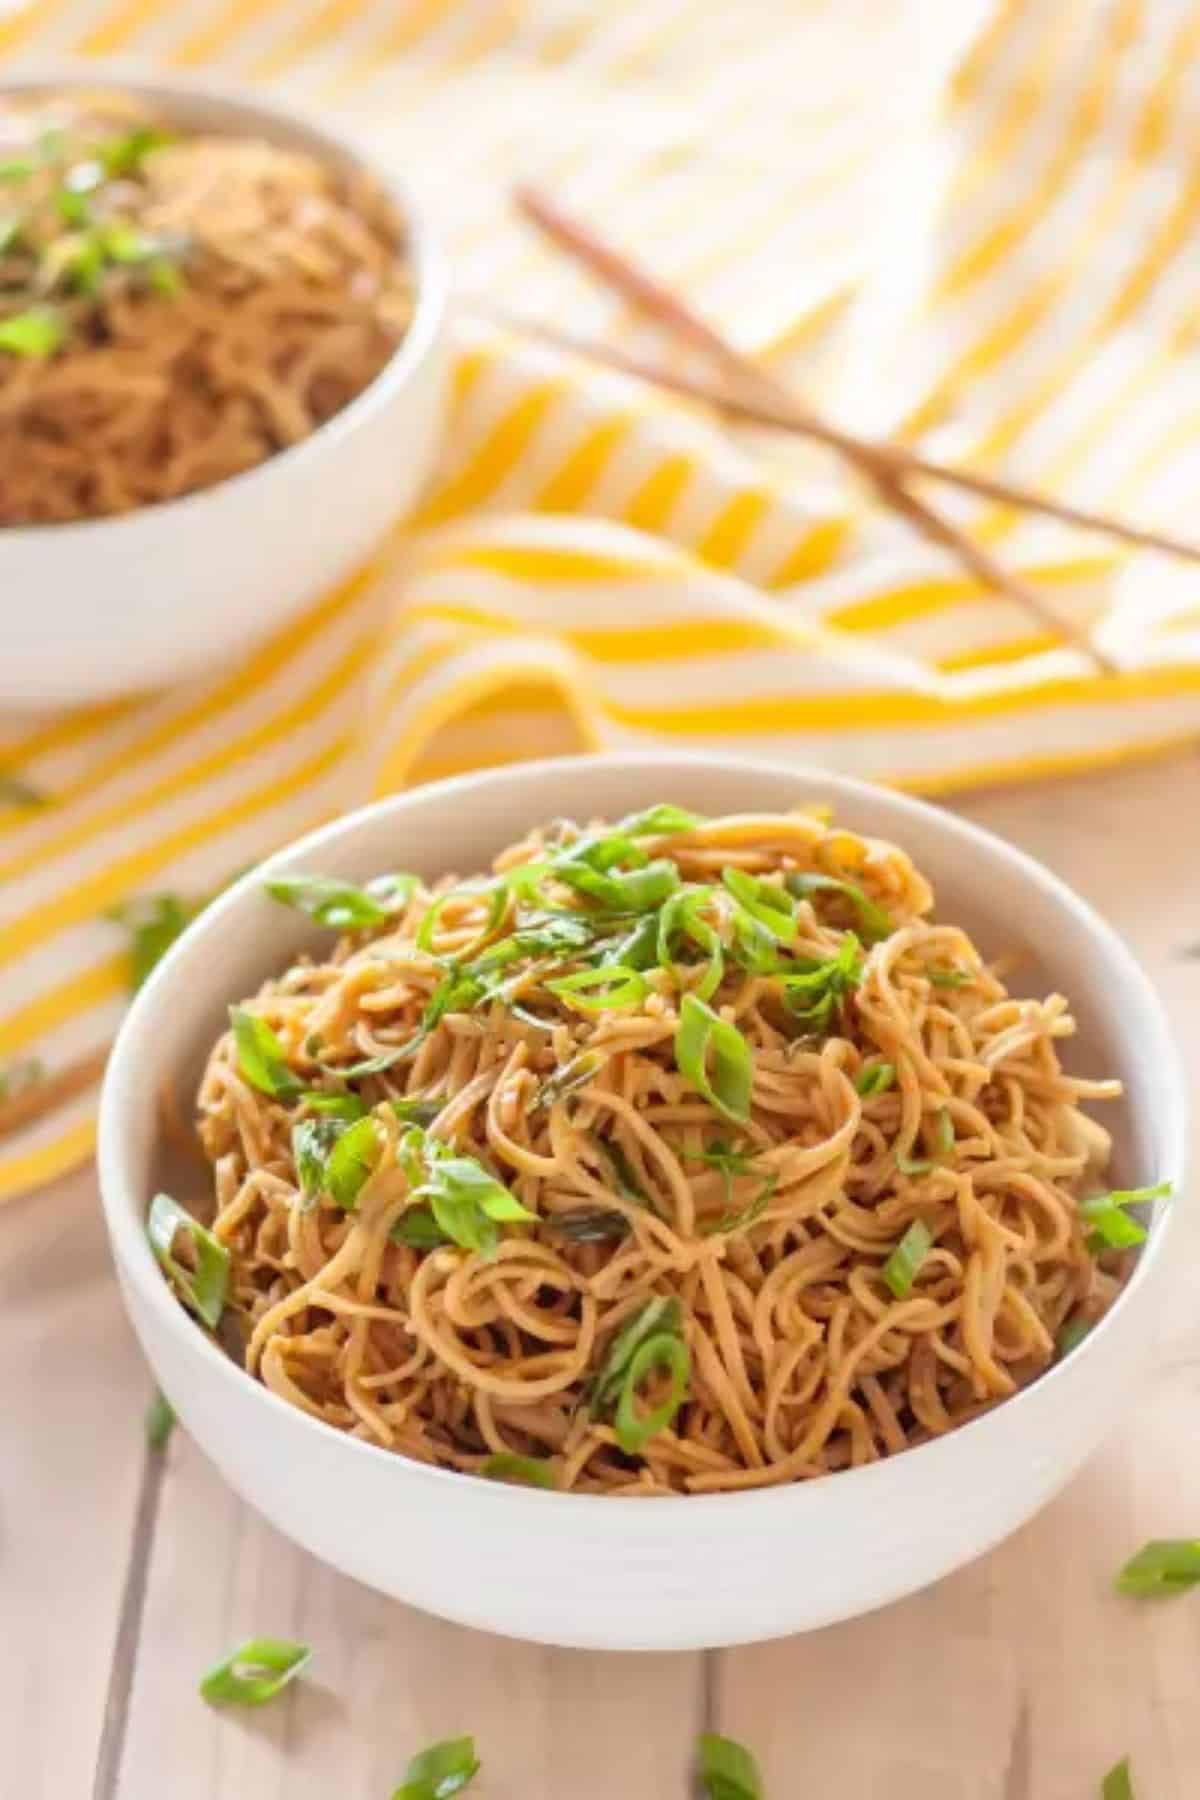 Delicious Gluten-Free Sticky Garlic Noodles in a white bowl.